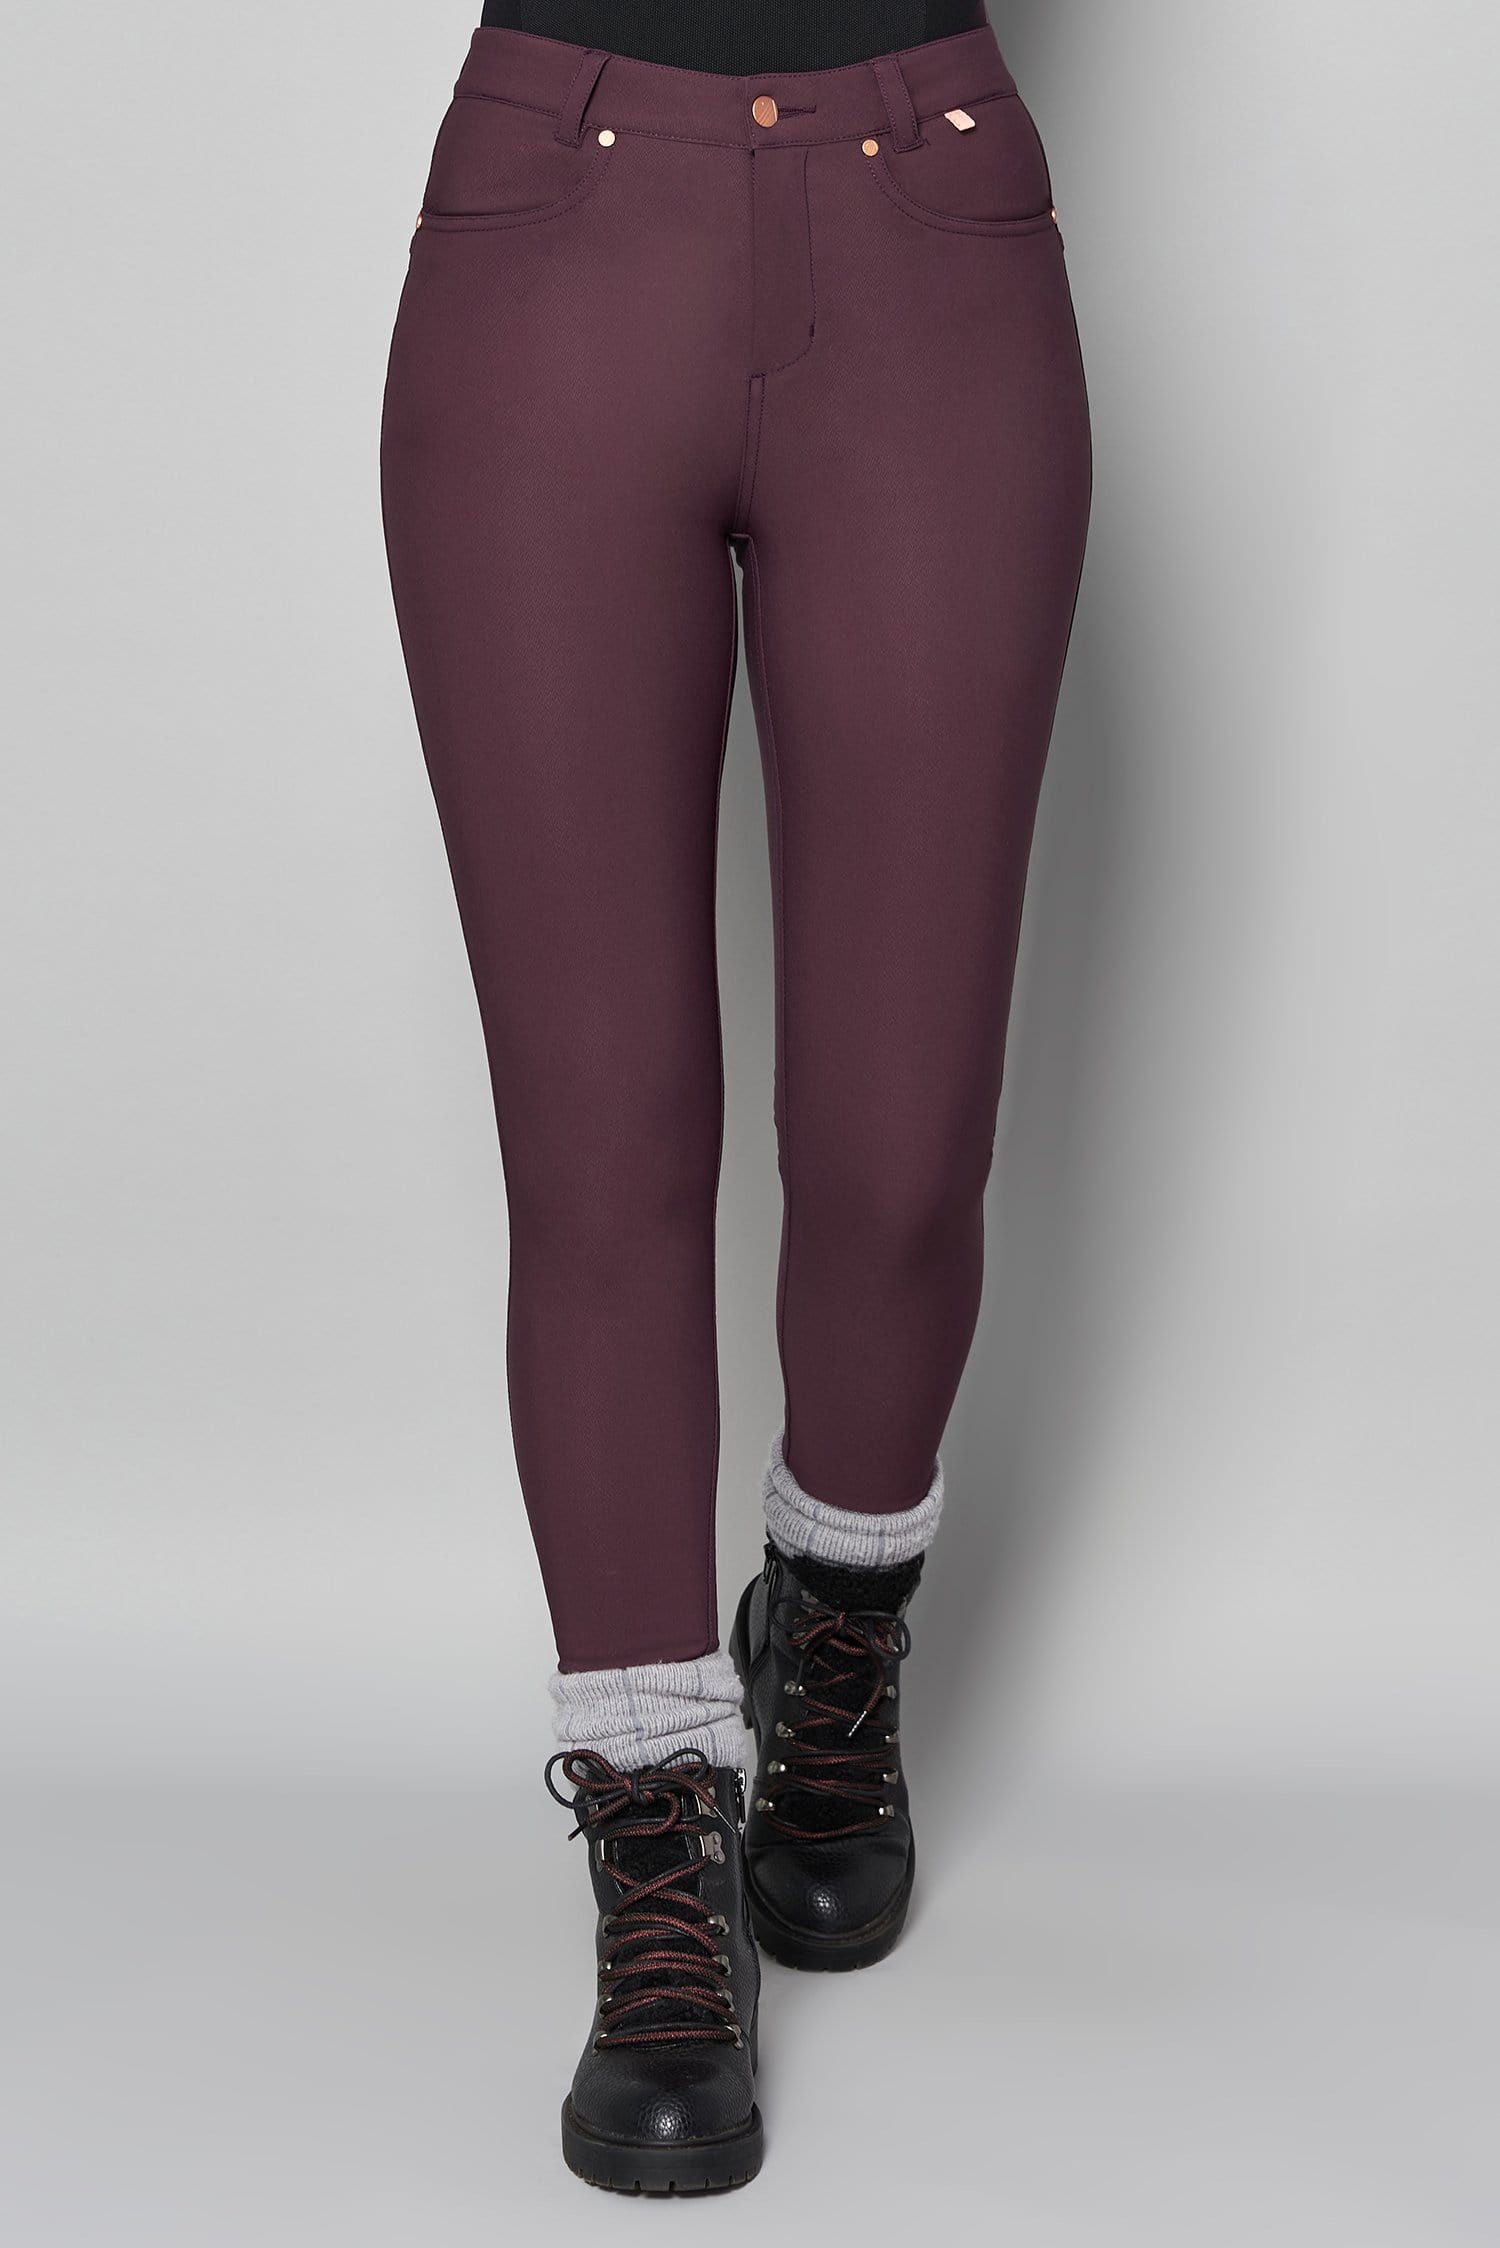 Thermal Skinny Outdoor Trousers - Aubergine - 30r / Uk12 - Womens - Acai Outdoorwear